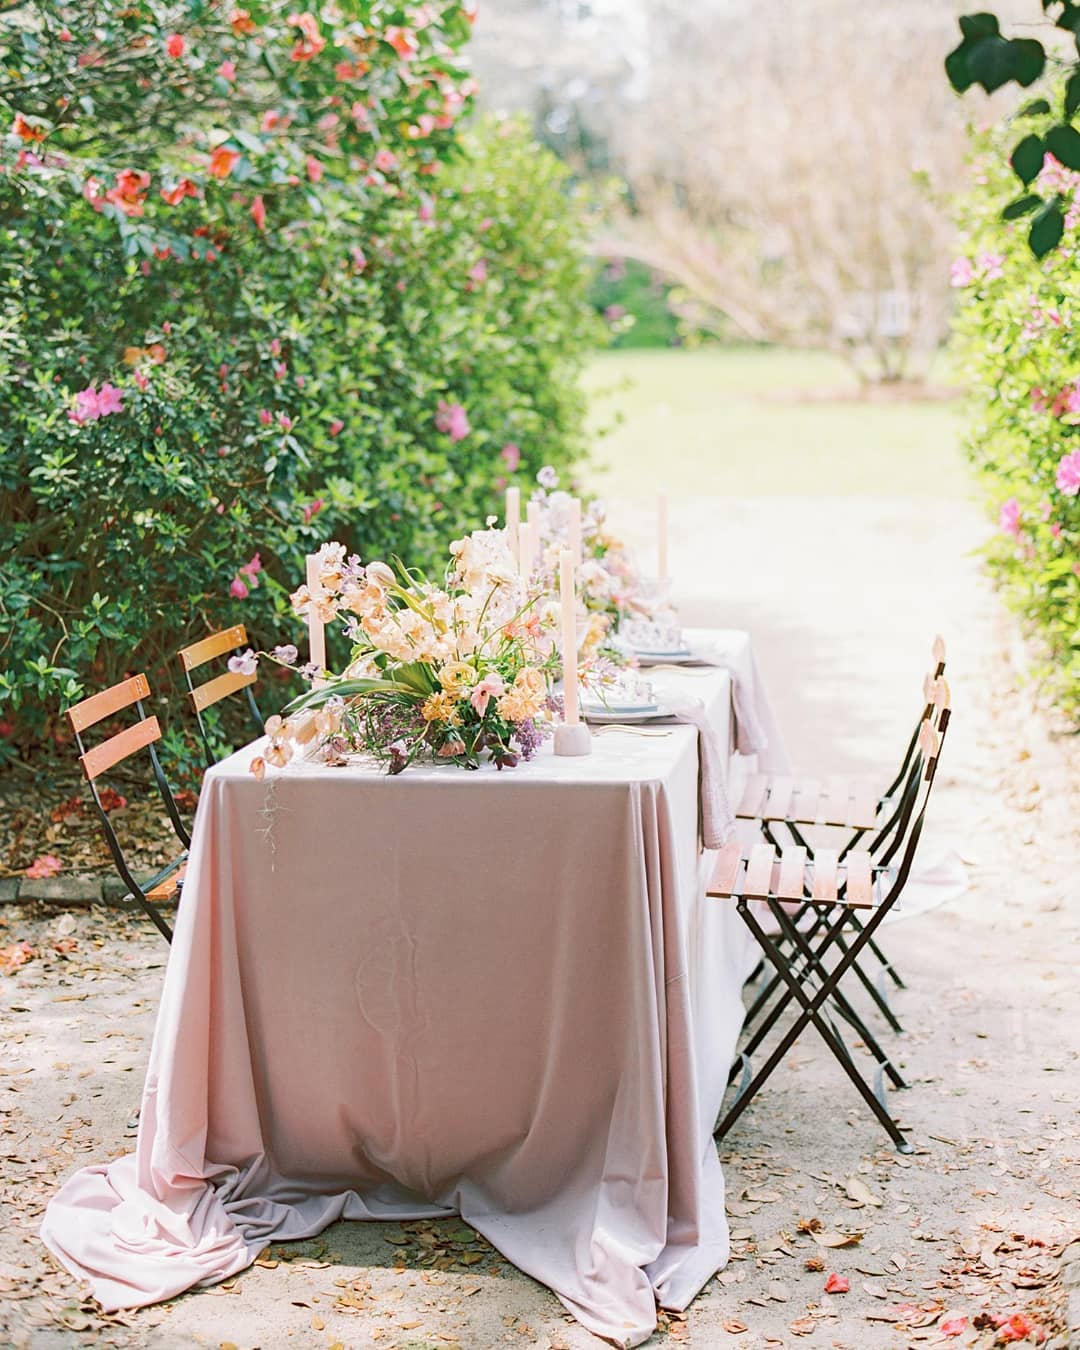 Spring garden wedding with textured candles, ikebana flowers and bistro chairs designed by Willow and Oak Events // Photo by The Happy Bloom 